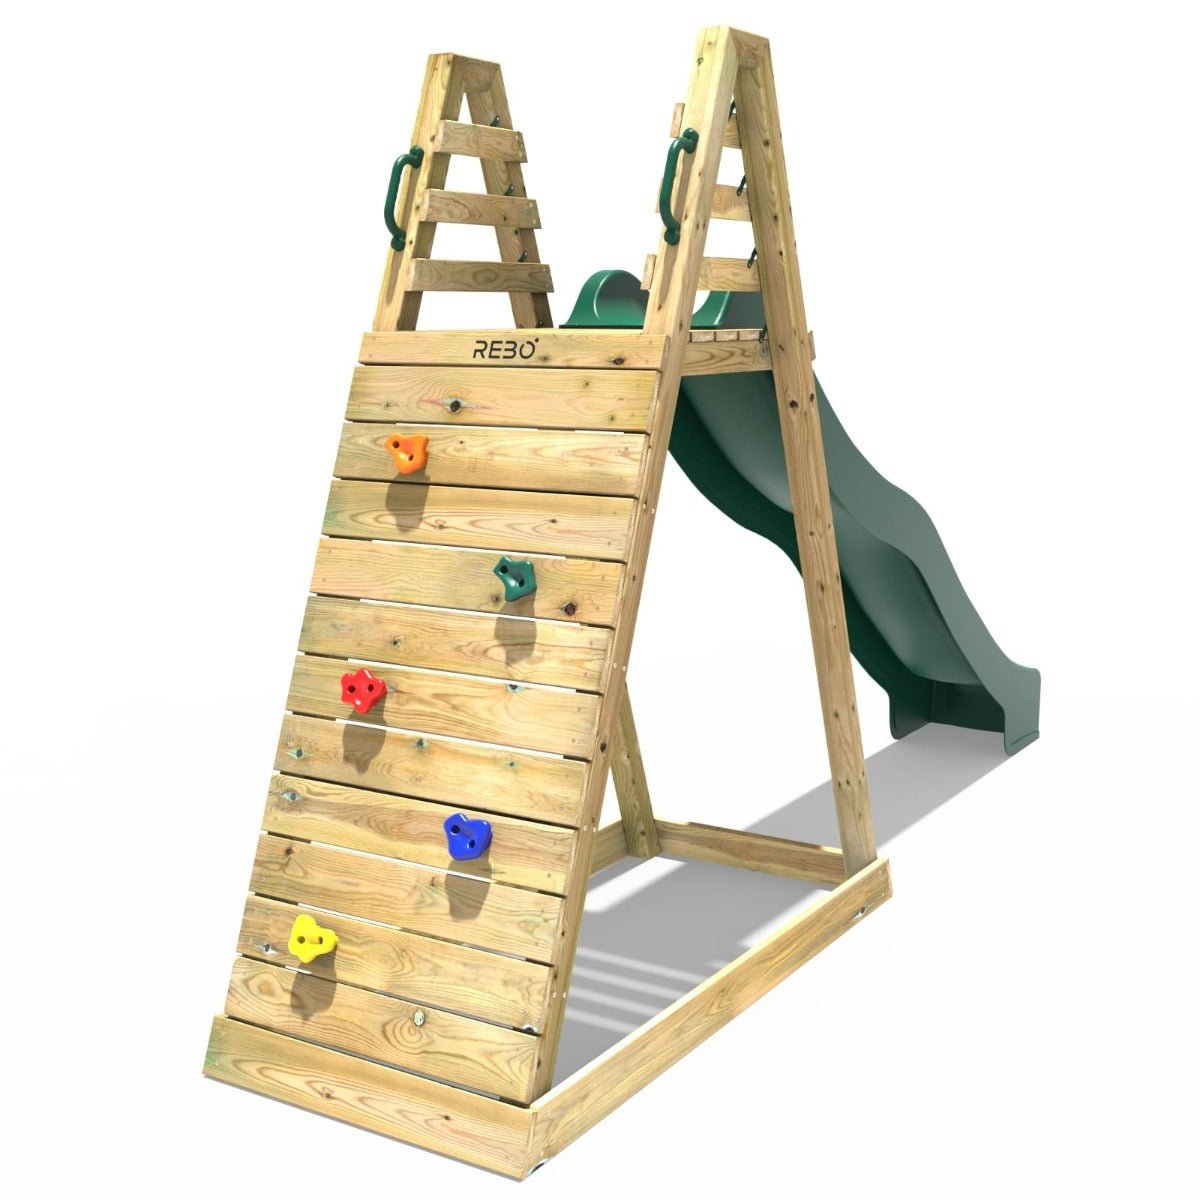 Rebo Wooden Free Standing Slide with 10ft Water Slide - with Climbing Wall